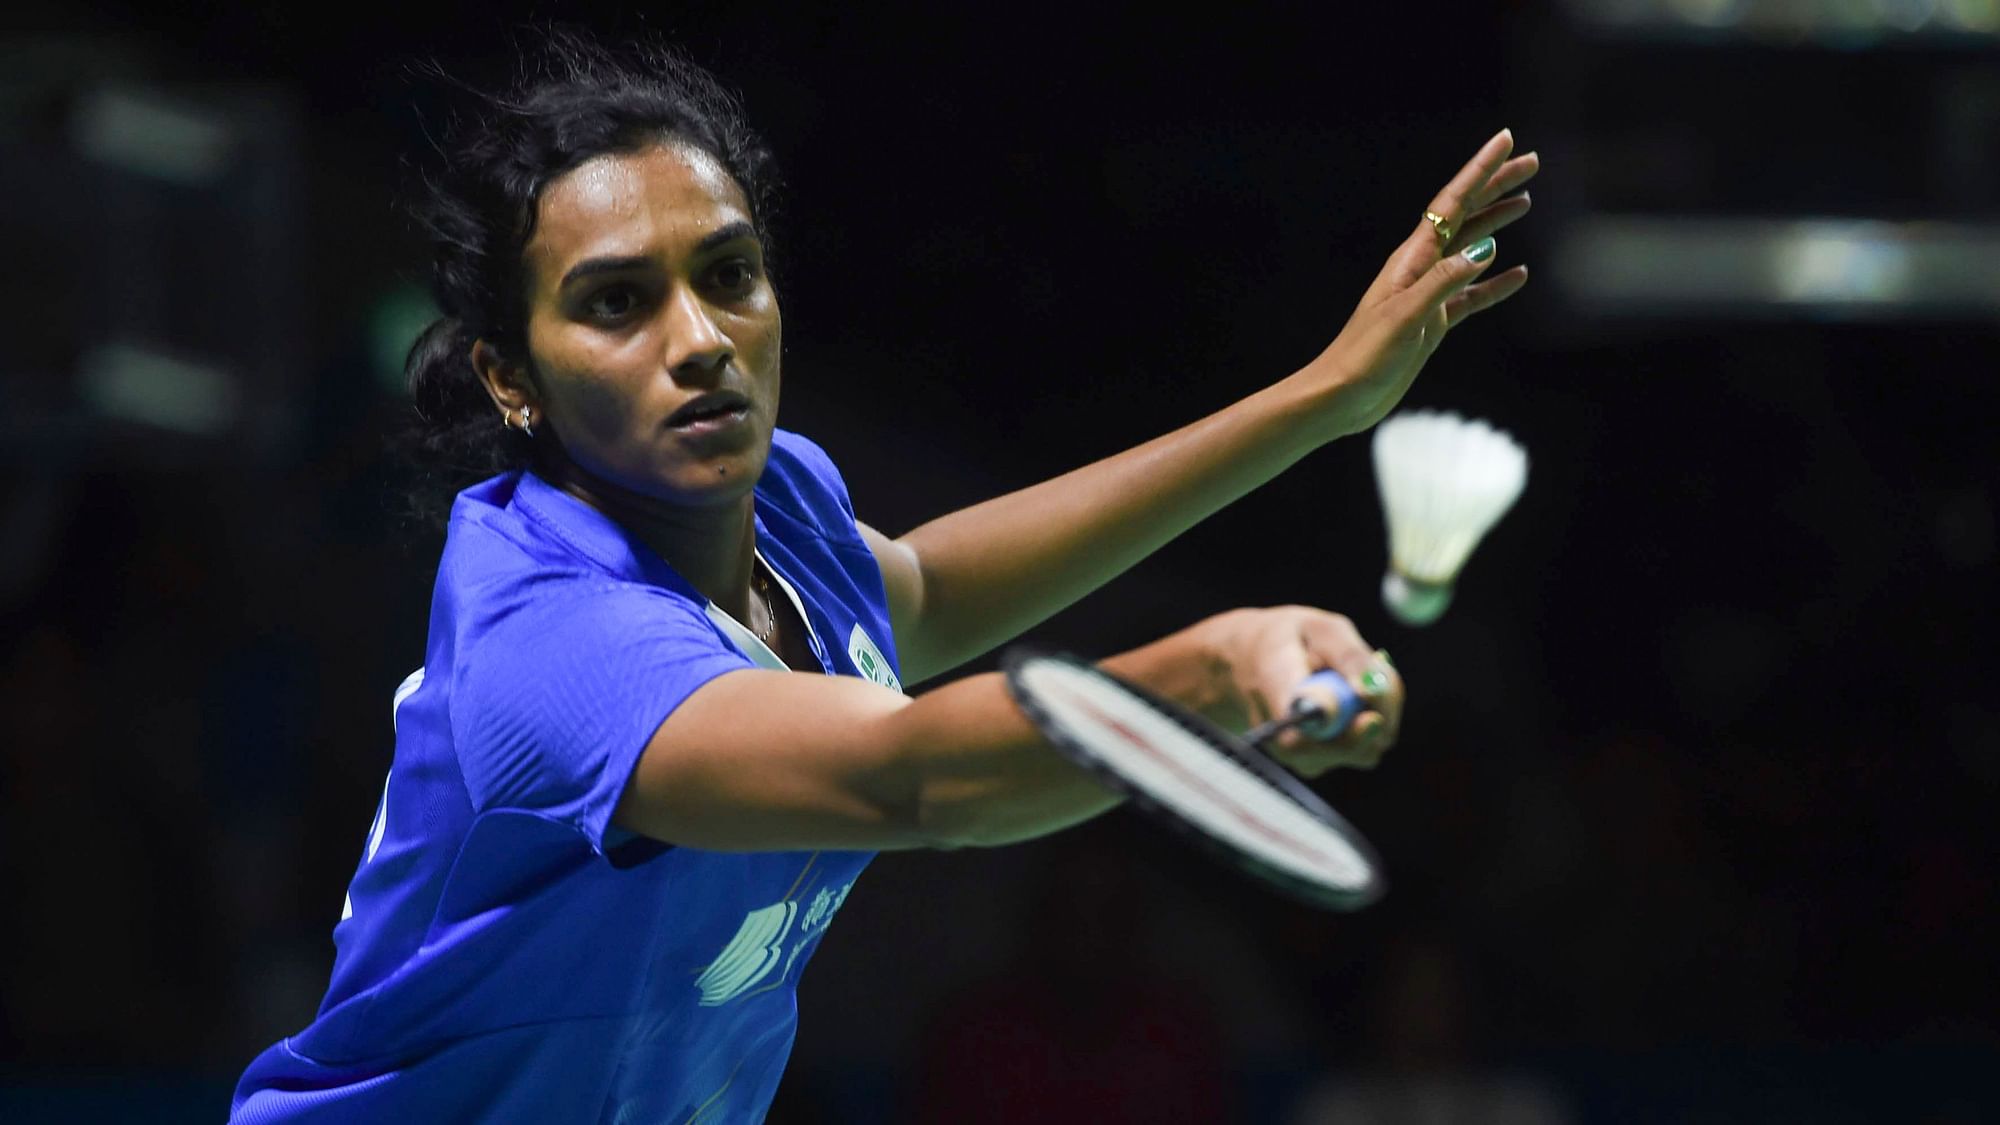 Sindhu once again failed to go past Yamaguchi as she suffered a 18-21, 15-21 defeat.